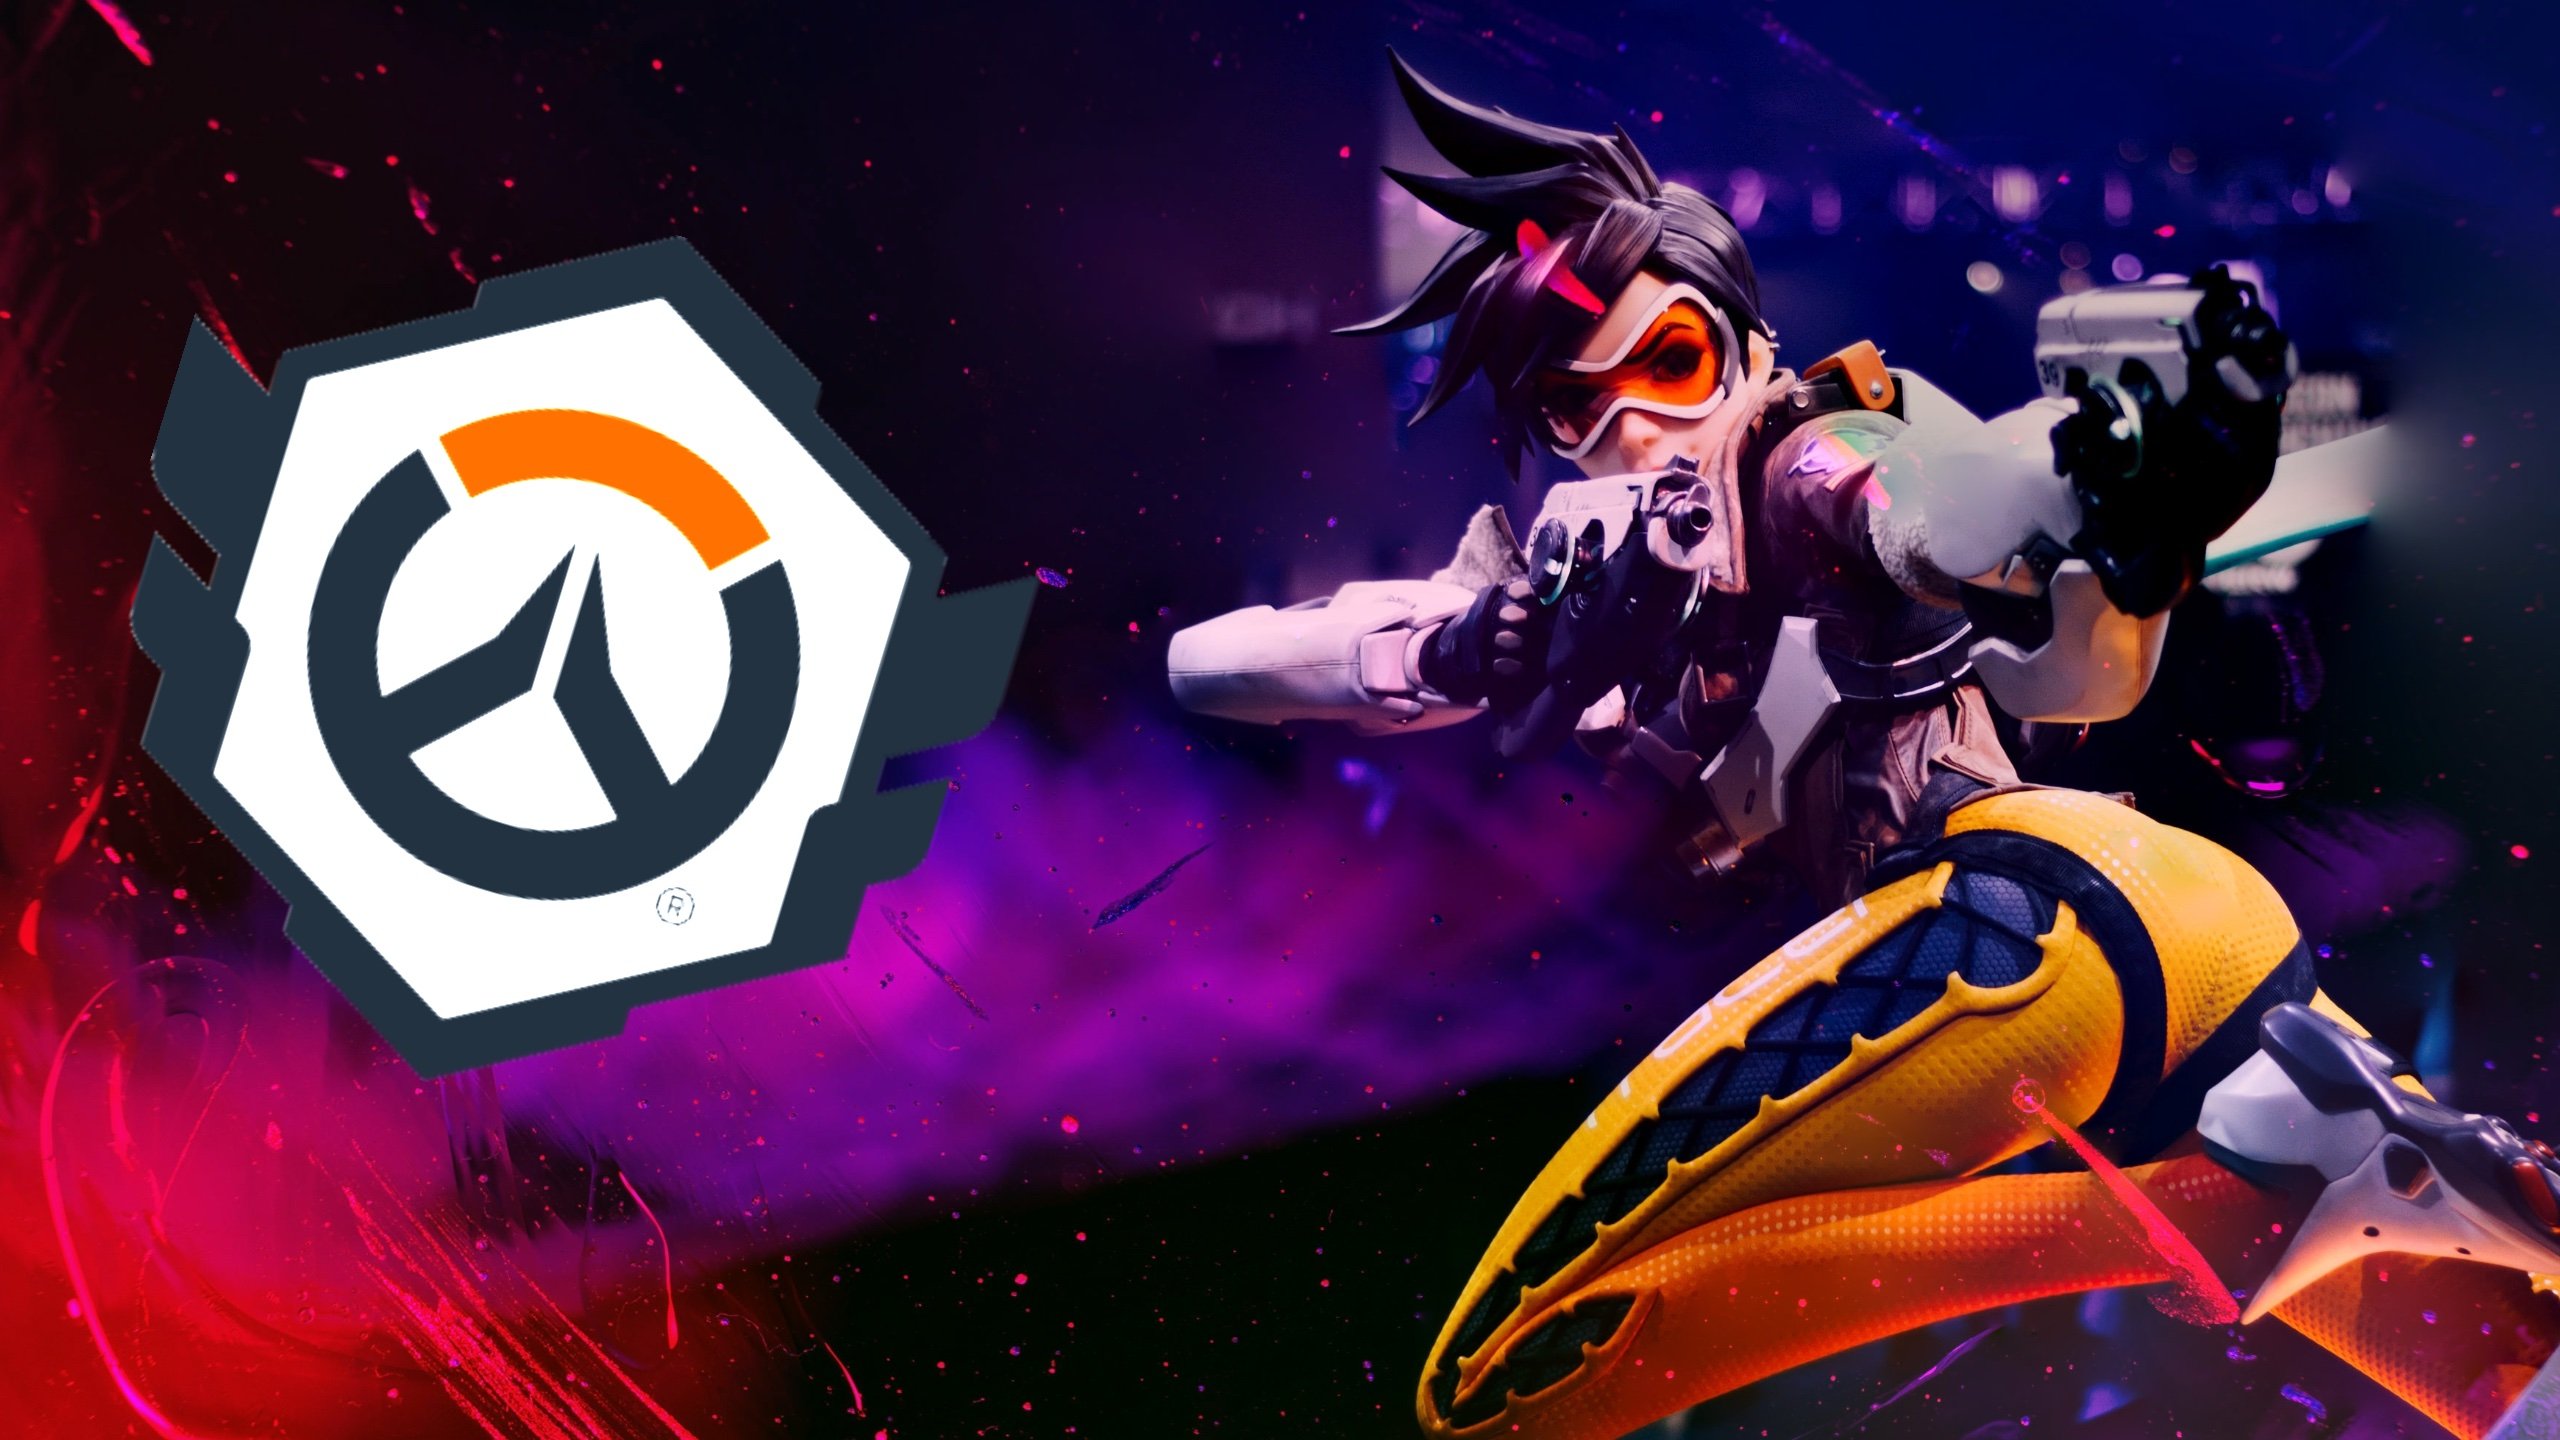 Overwatch Series Bans Crypto, NFT, and AI Sponsorships